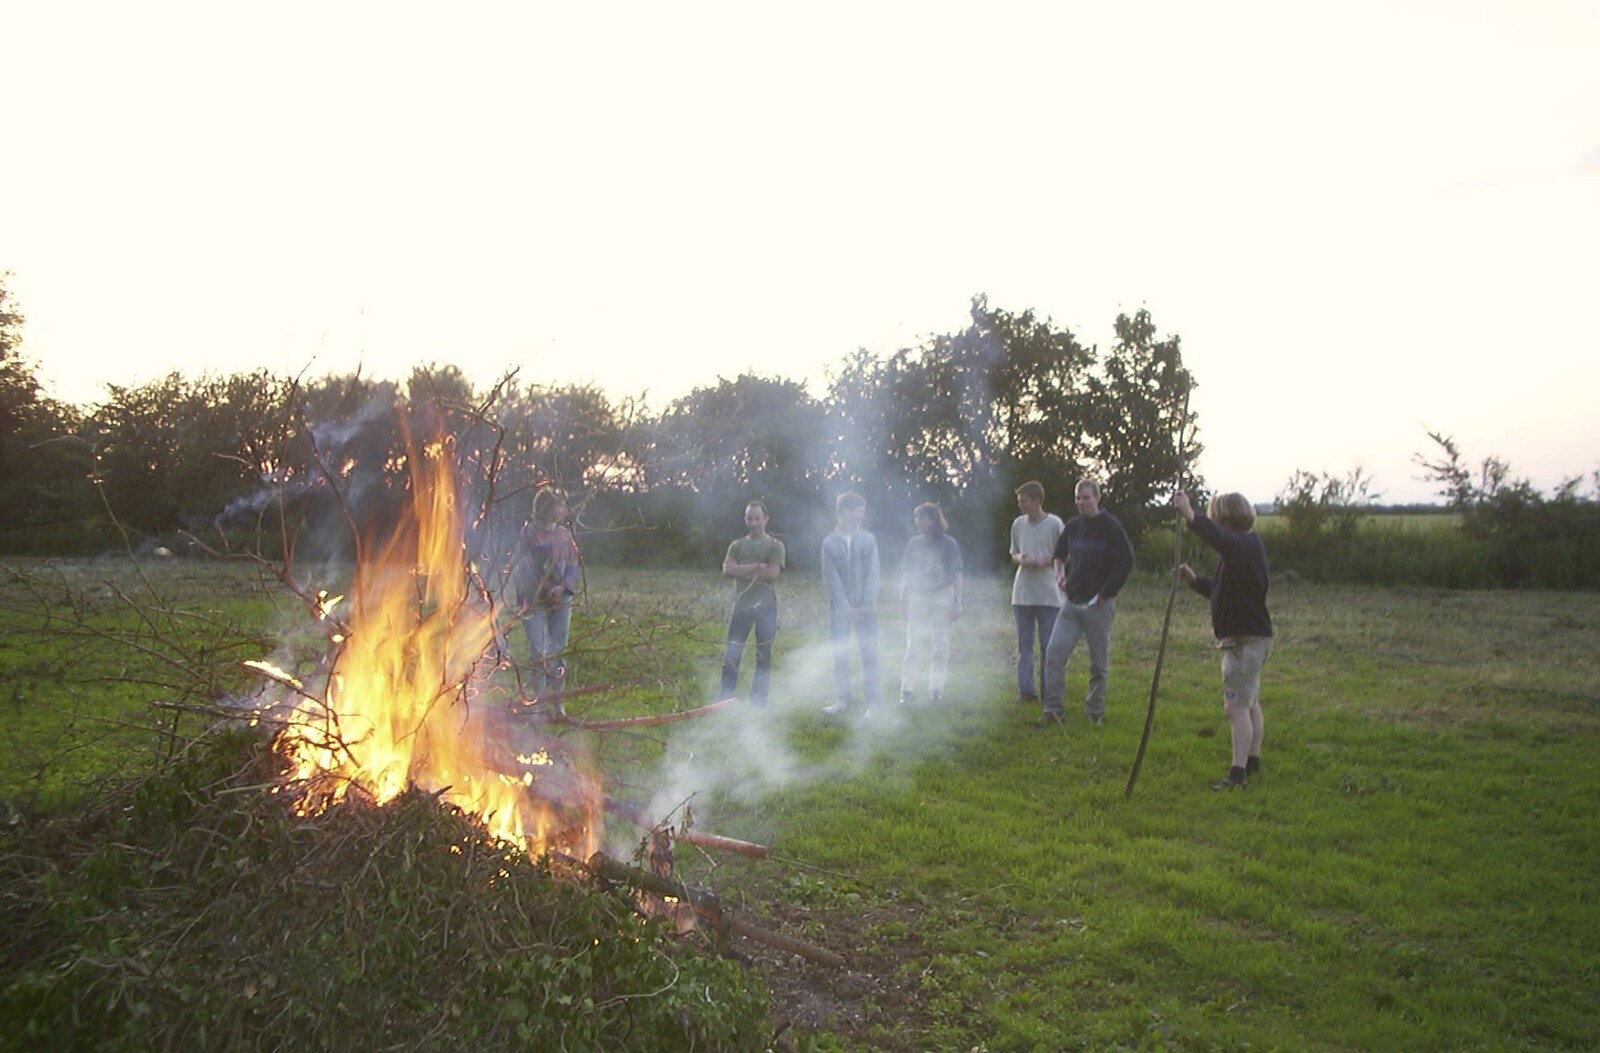 A crowd gathers around the bonfire from DH's BSCC Barbeque, The Old Post Office, Brome, Suffolk - 7th July 2002